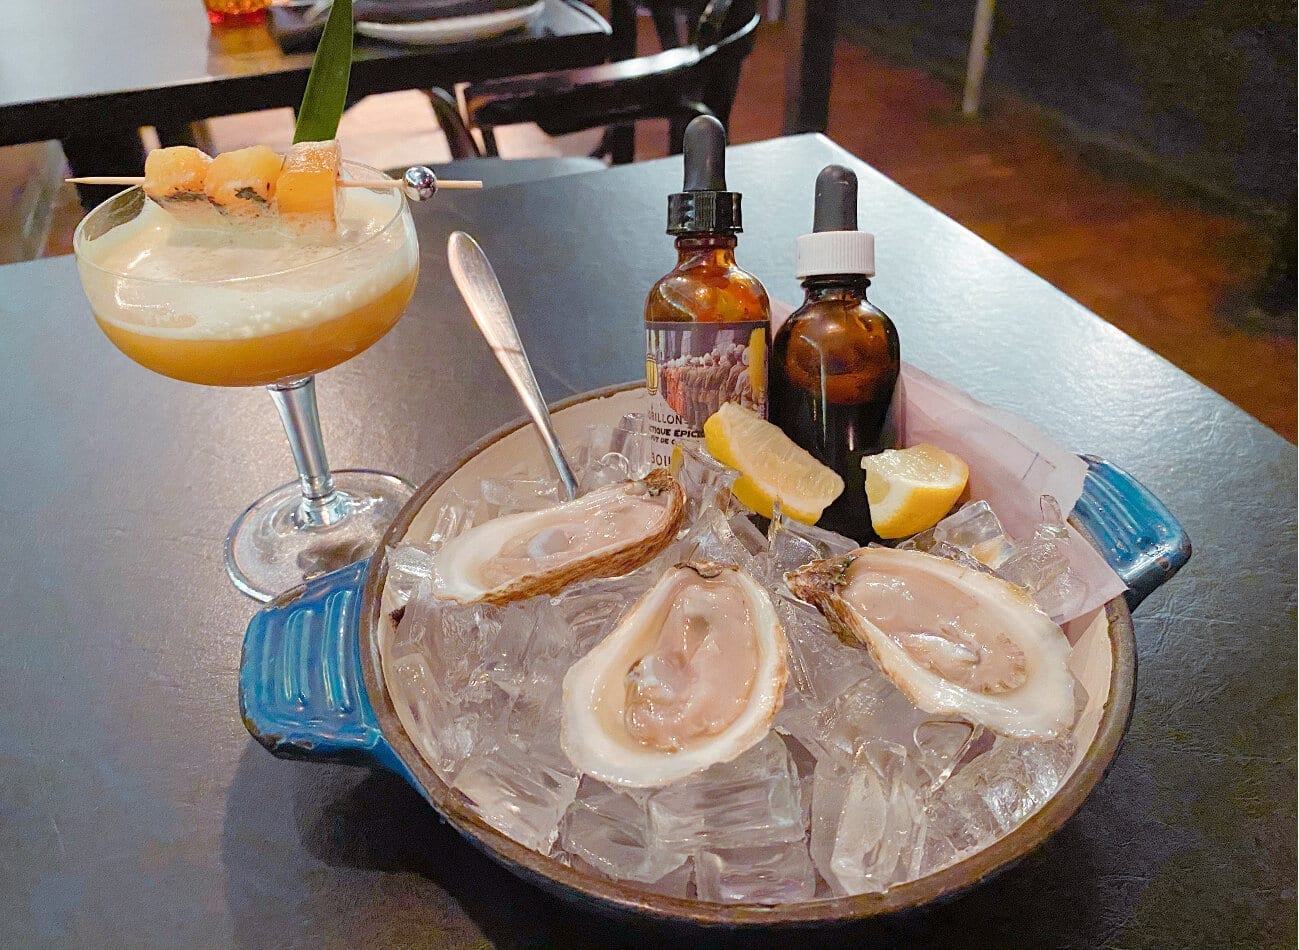 10 Best Restos in Quebec City for Oysters | Urban Guide Quebec